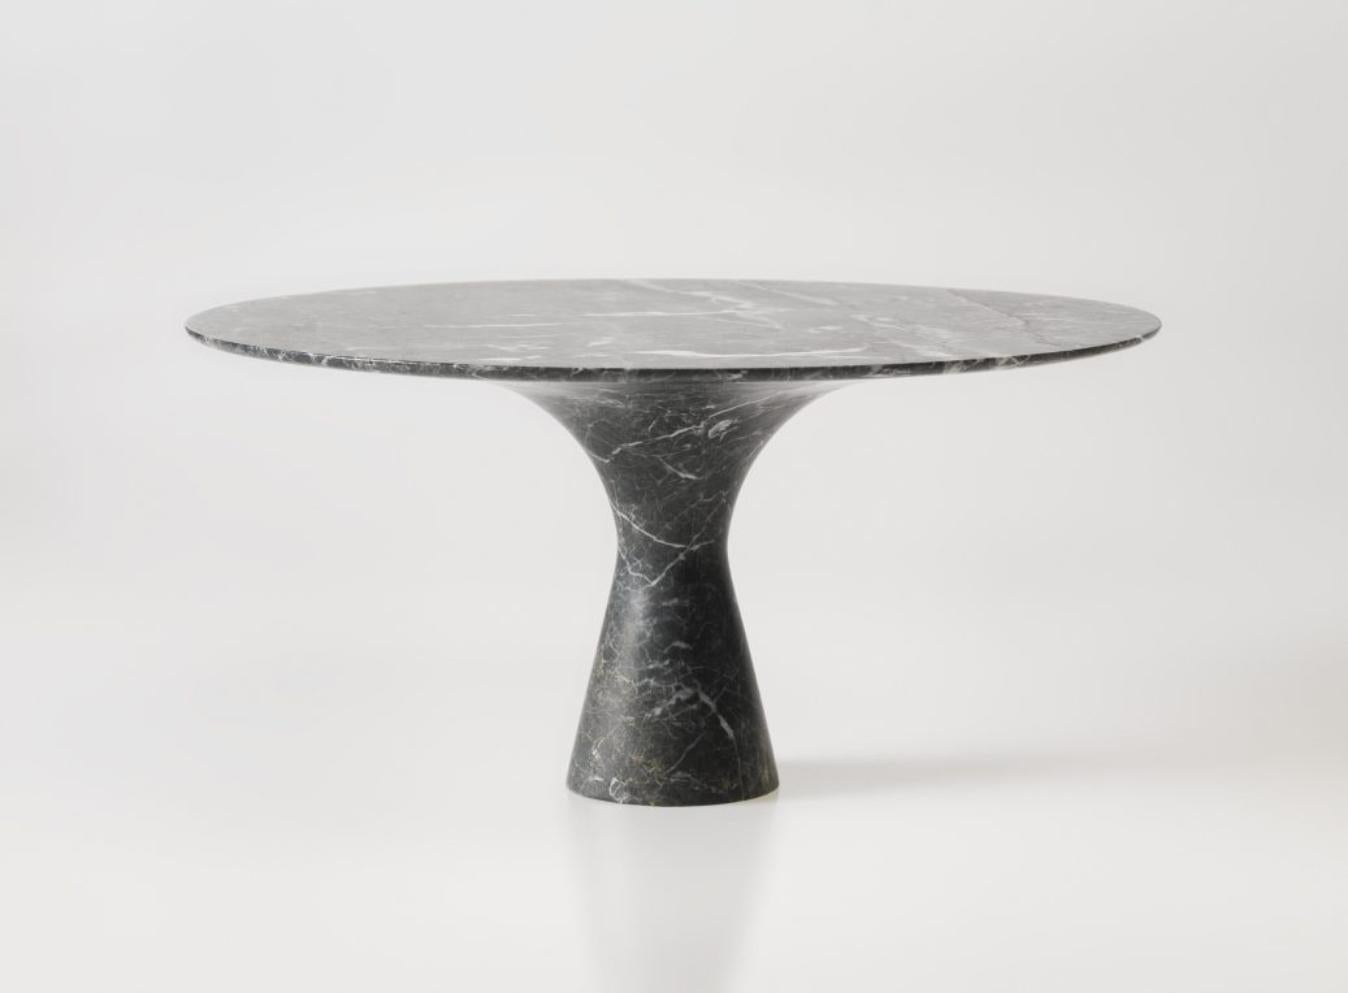 Port Saint Laurent Refined Contemporary Marble Dining Table 130/75 For Sale 5